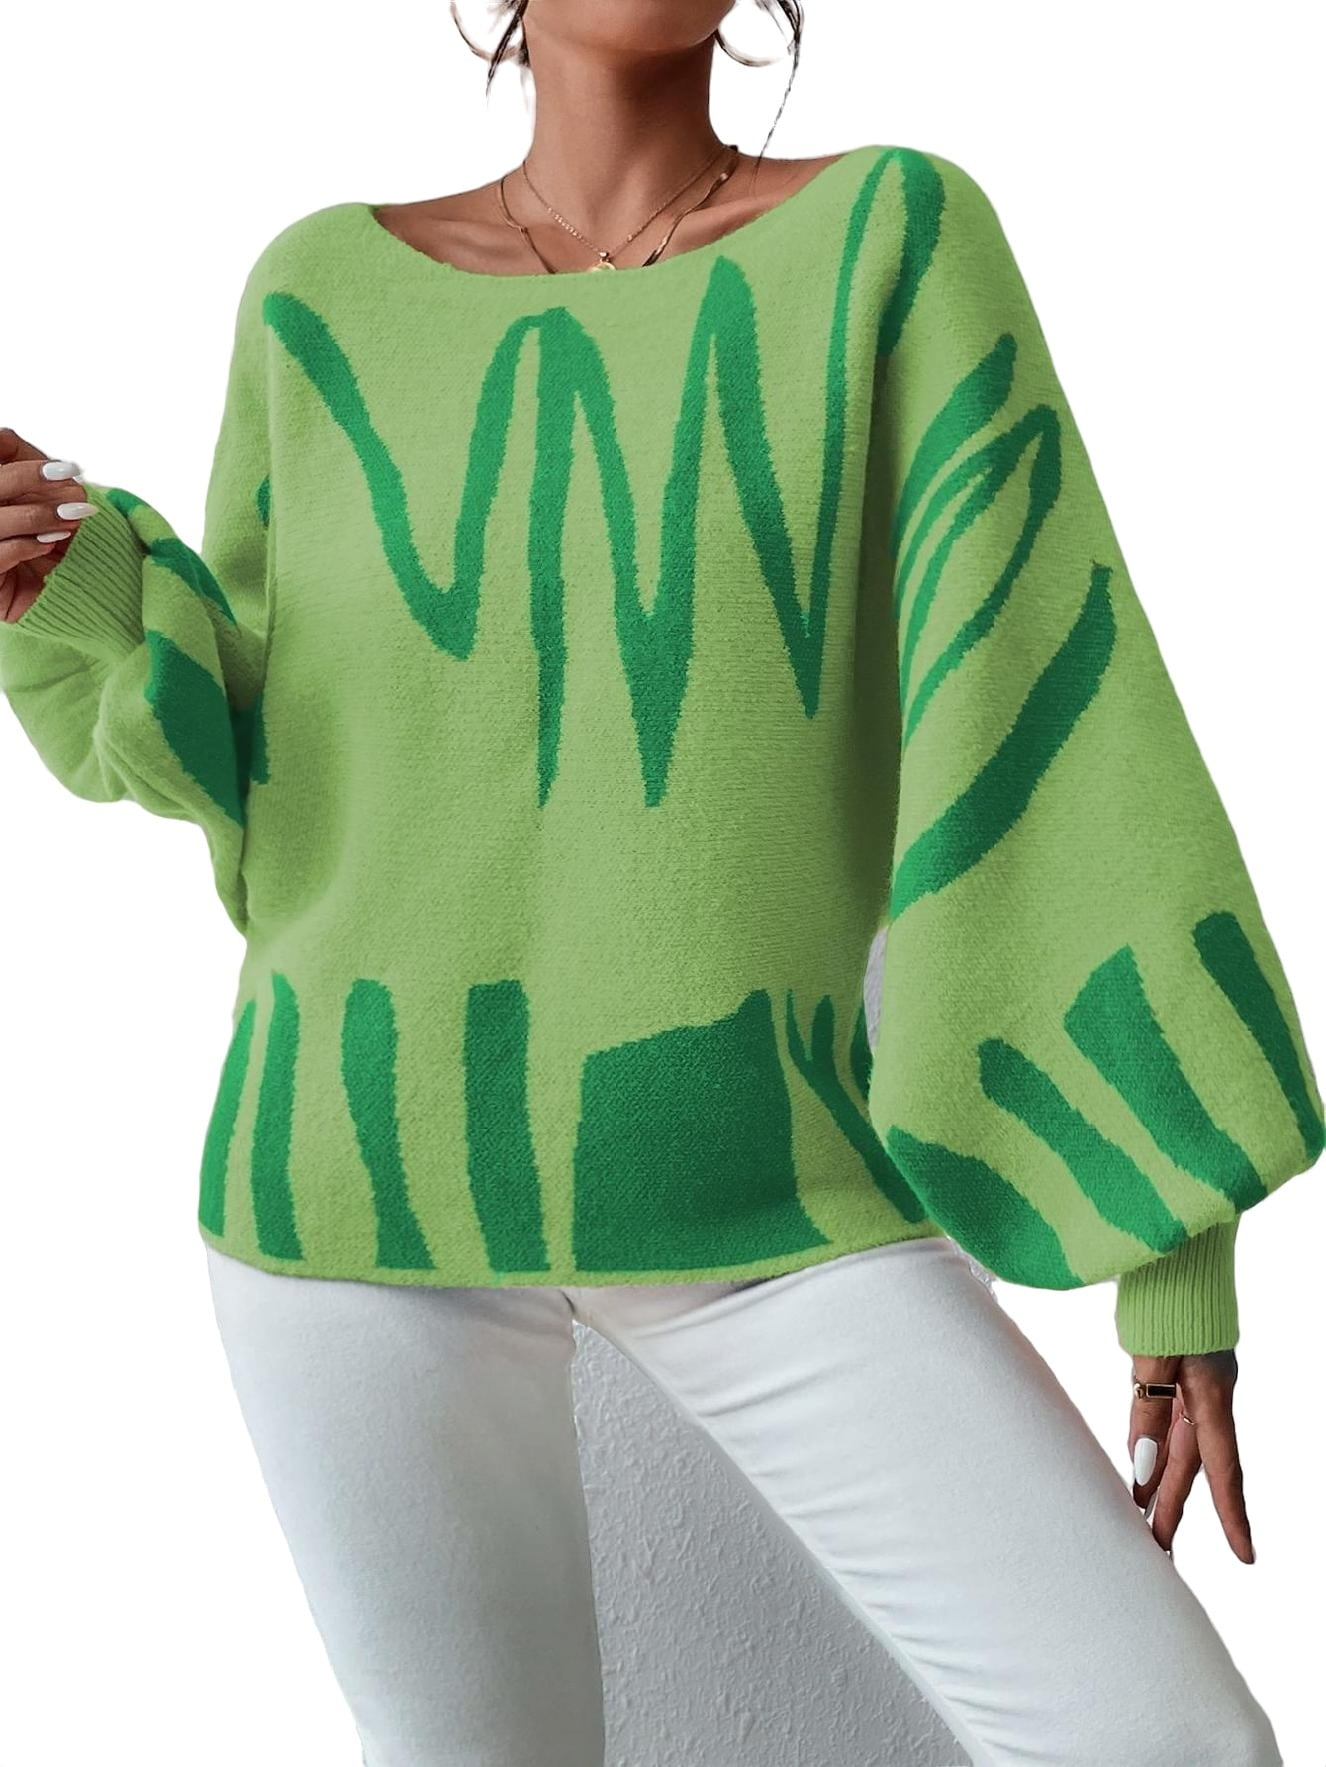 Casual Graphic Boat Neck Pullovers Long Sleeve Lime Green Women ...